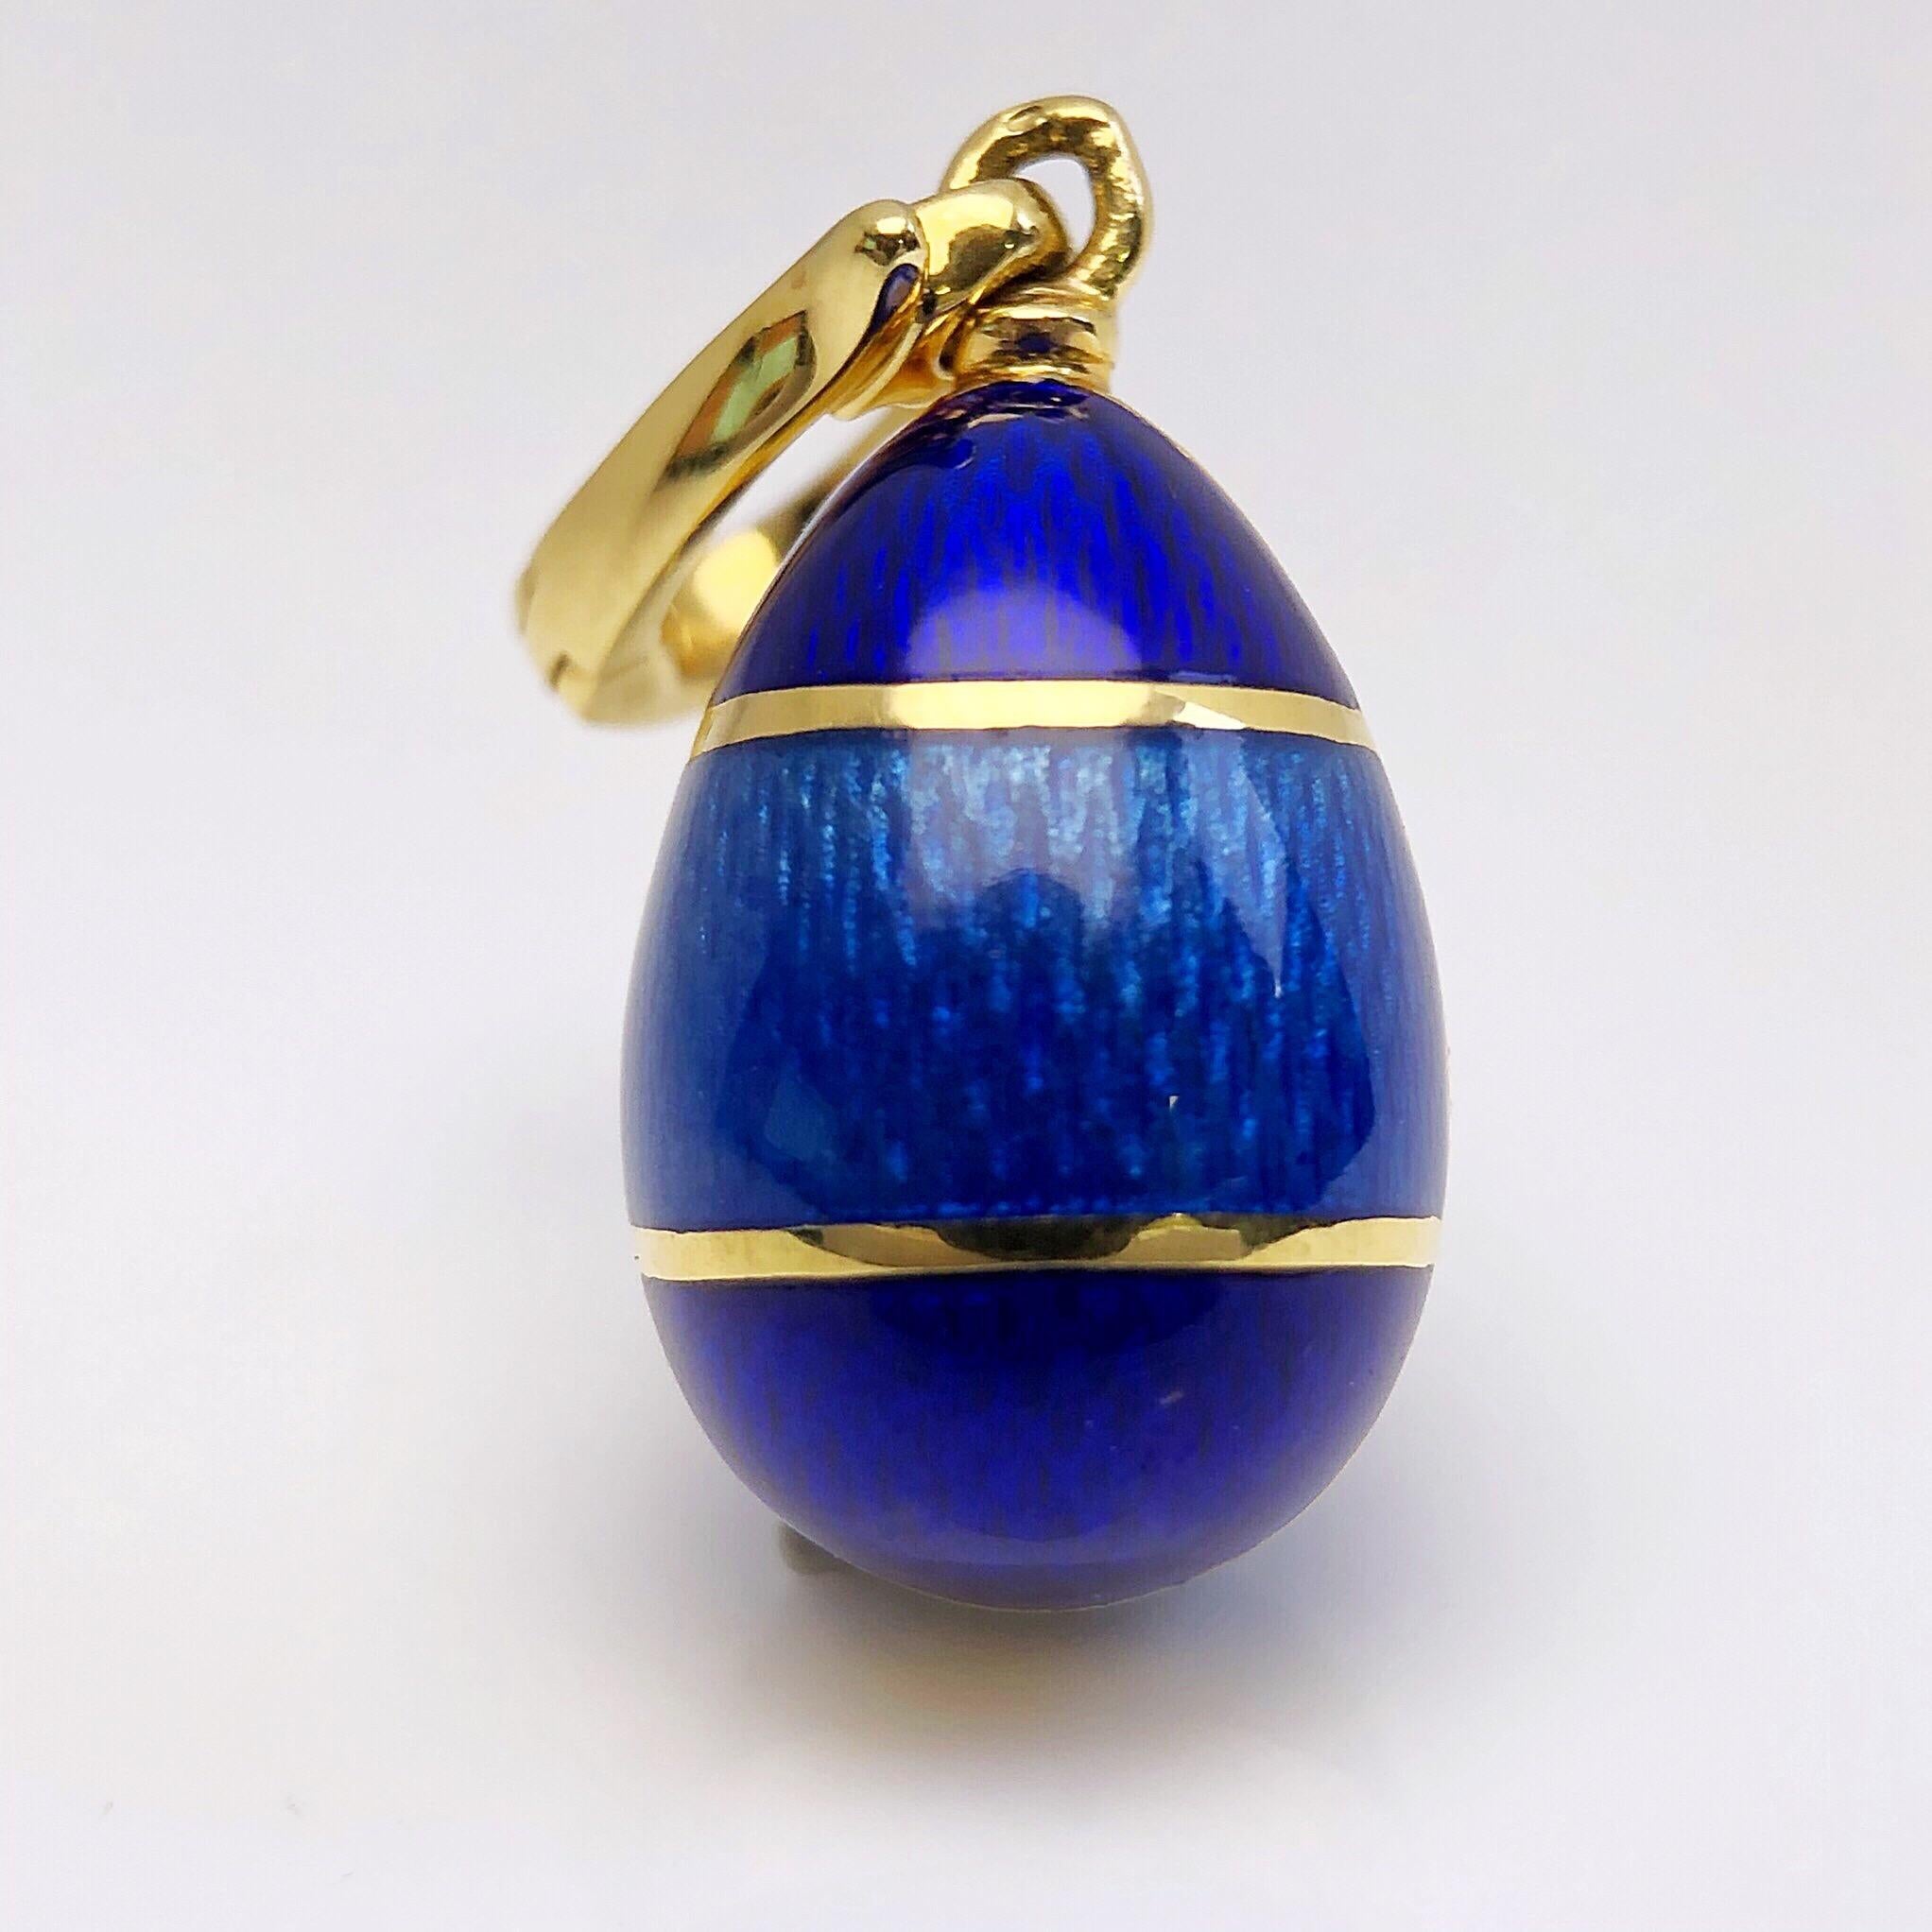 This modern 18 karat yellow gold and enamel egg was created by Victor Mayer. Crafted in the tradition of the original Imperial eggs, this pendant egg was designed to commemorate the new millennium. 
It features guilloche enamel in royal and medium